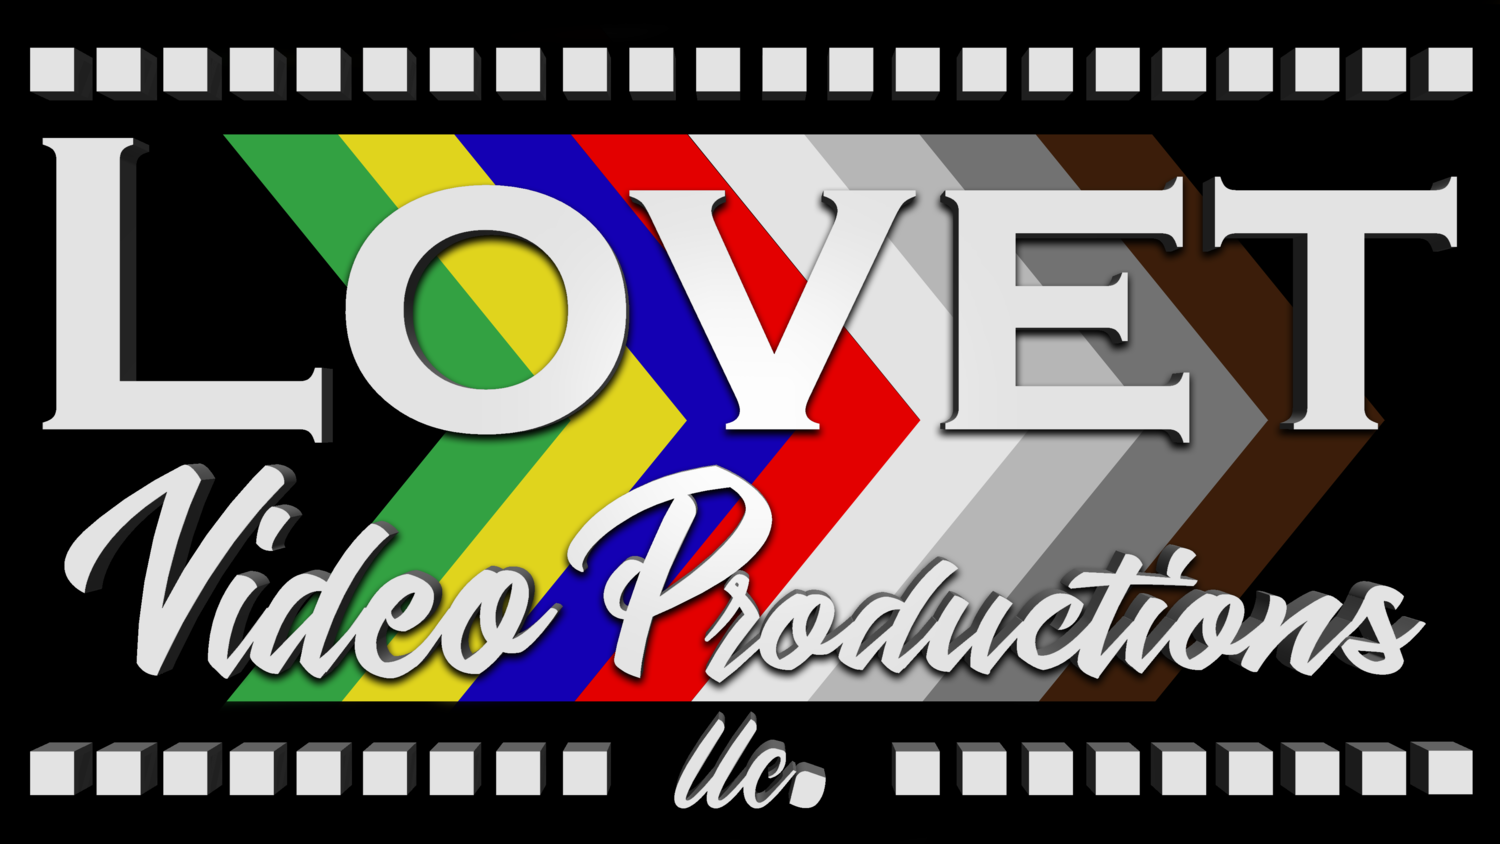 Lovet Video Productions